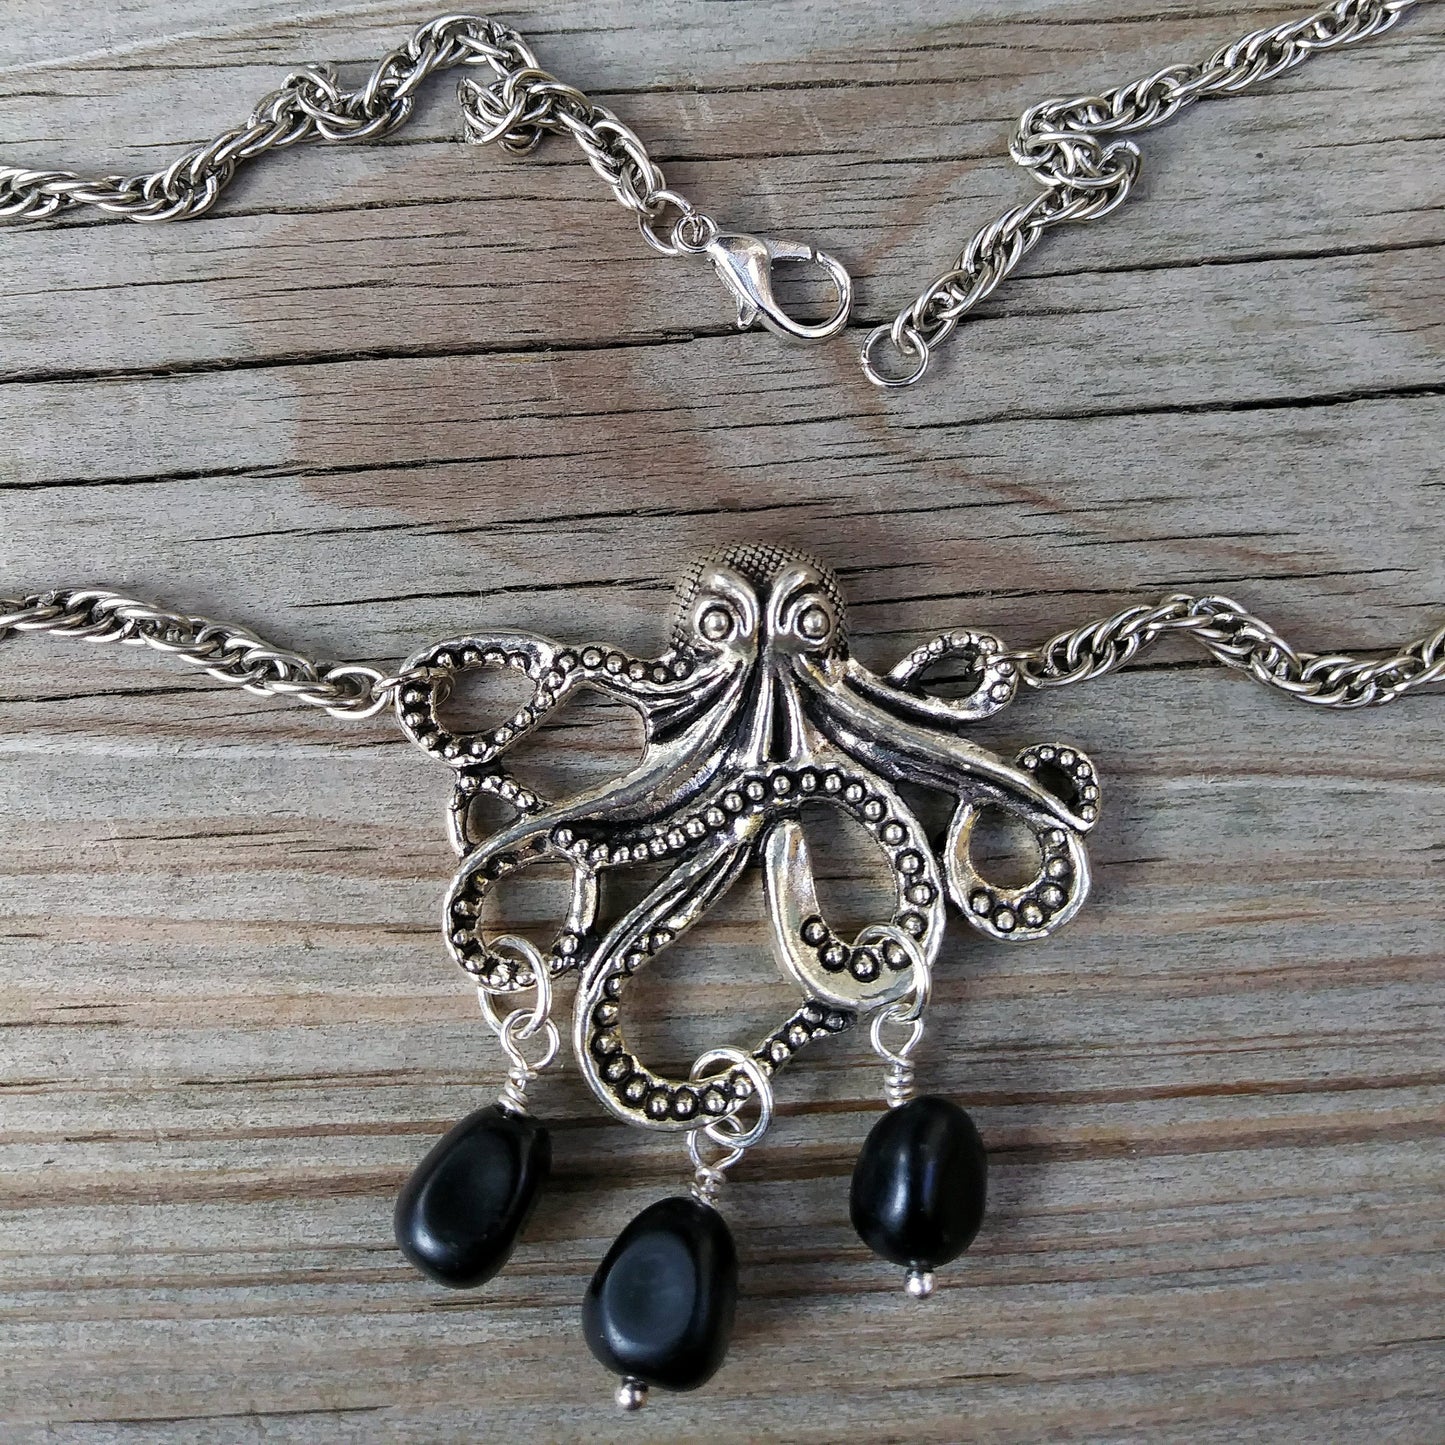 Black Obsidian Silver Kraken Octopus Necklace  on Thick Silver Rope Chain